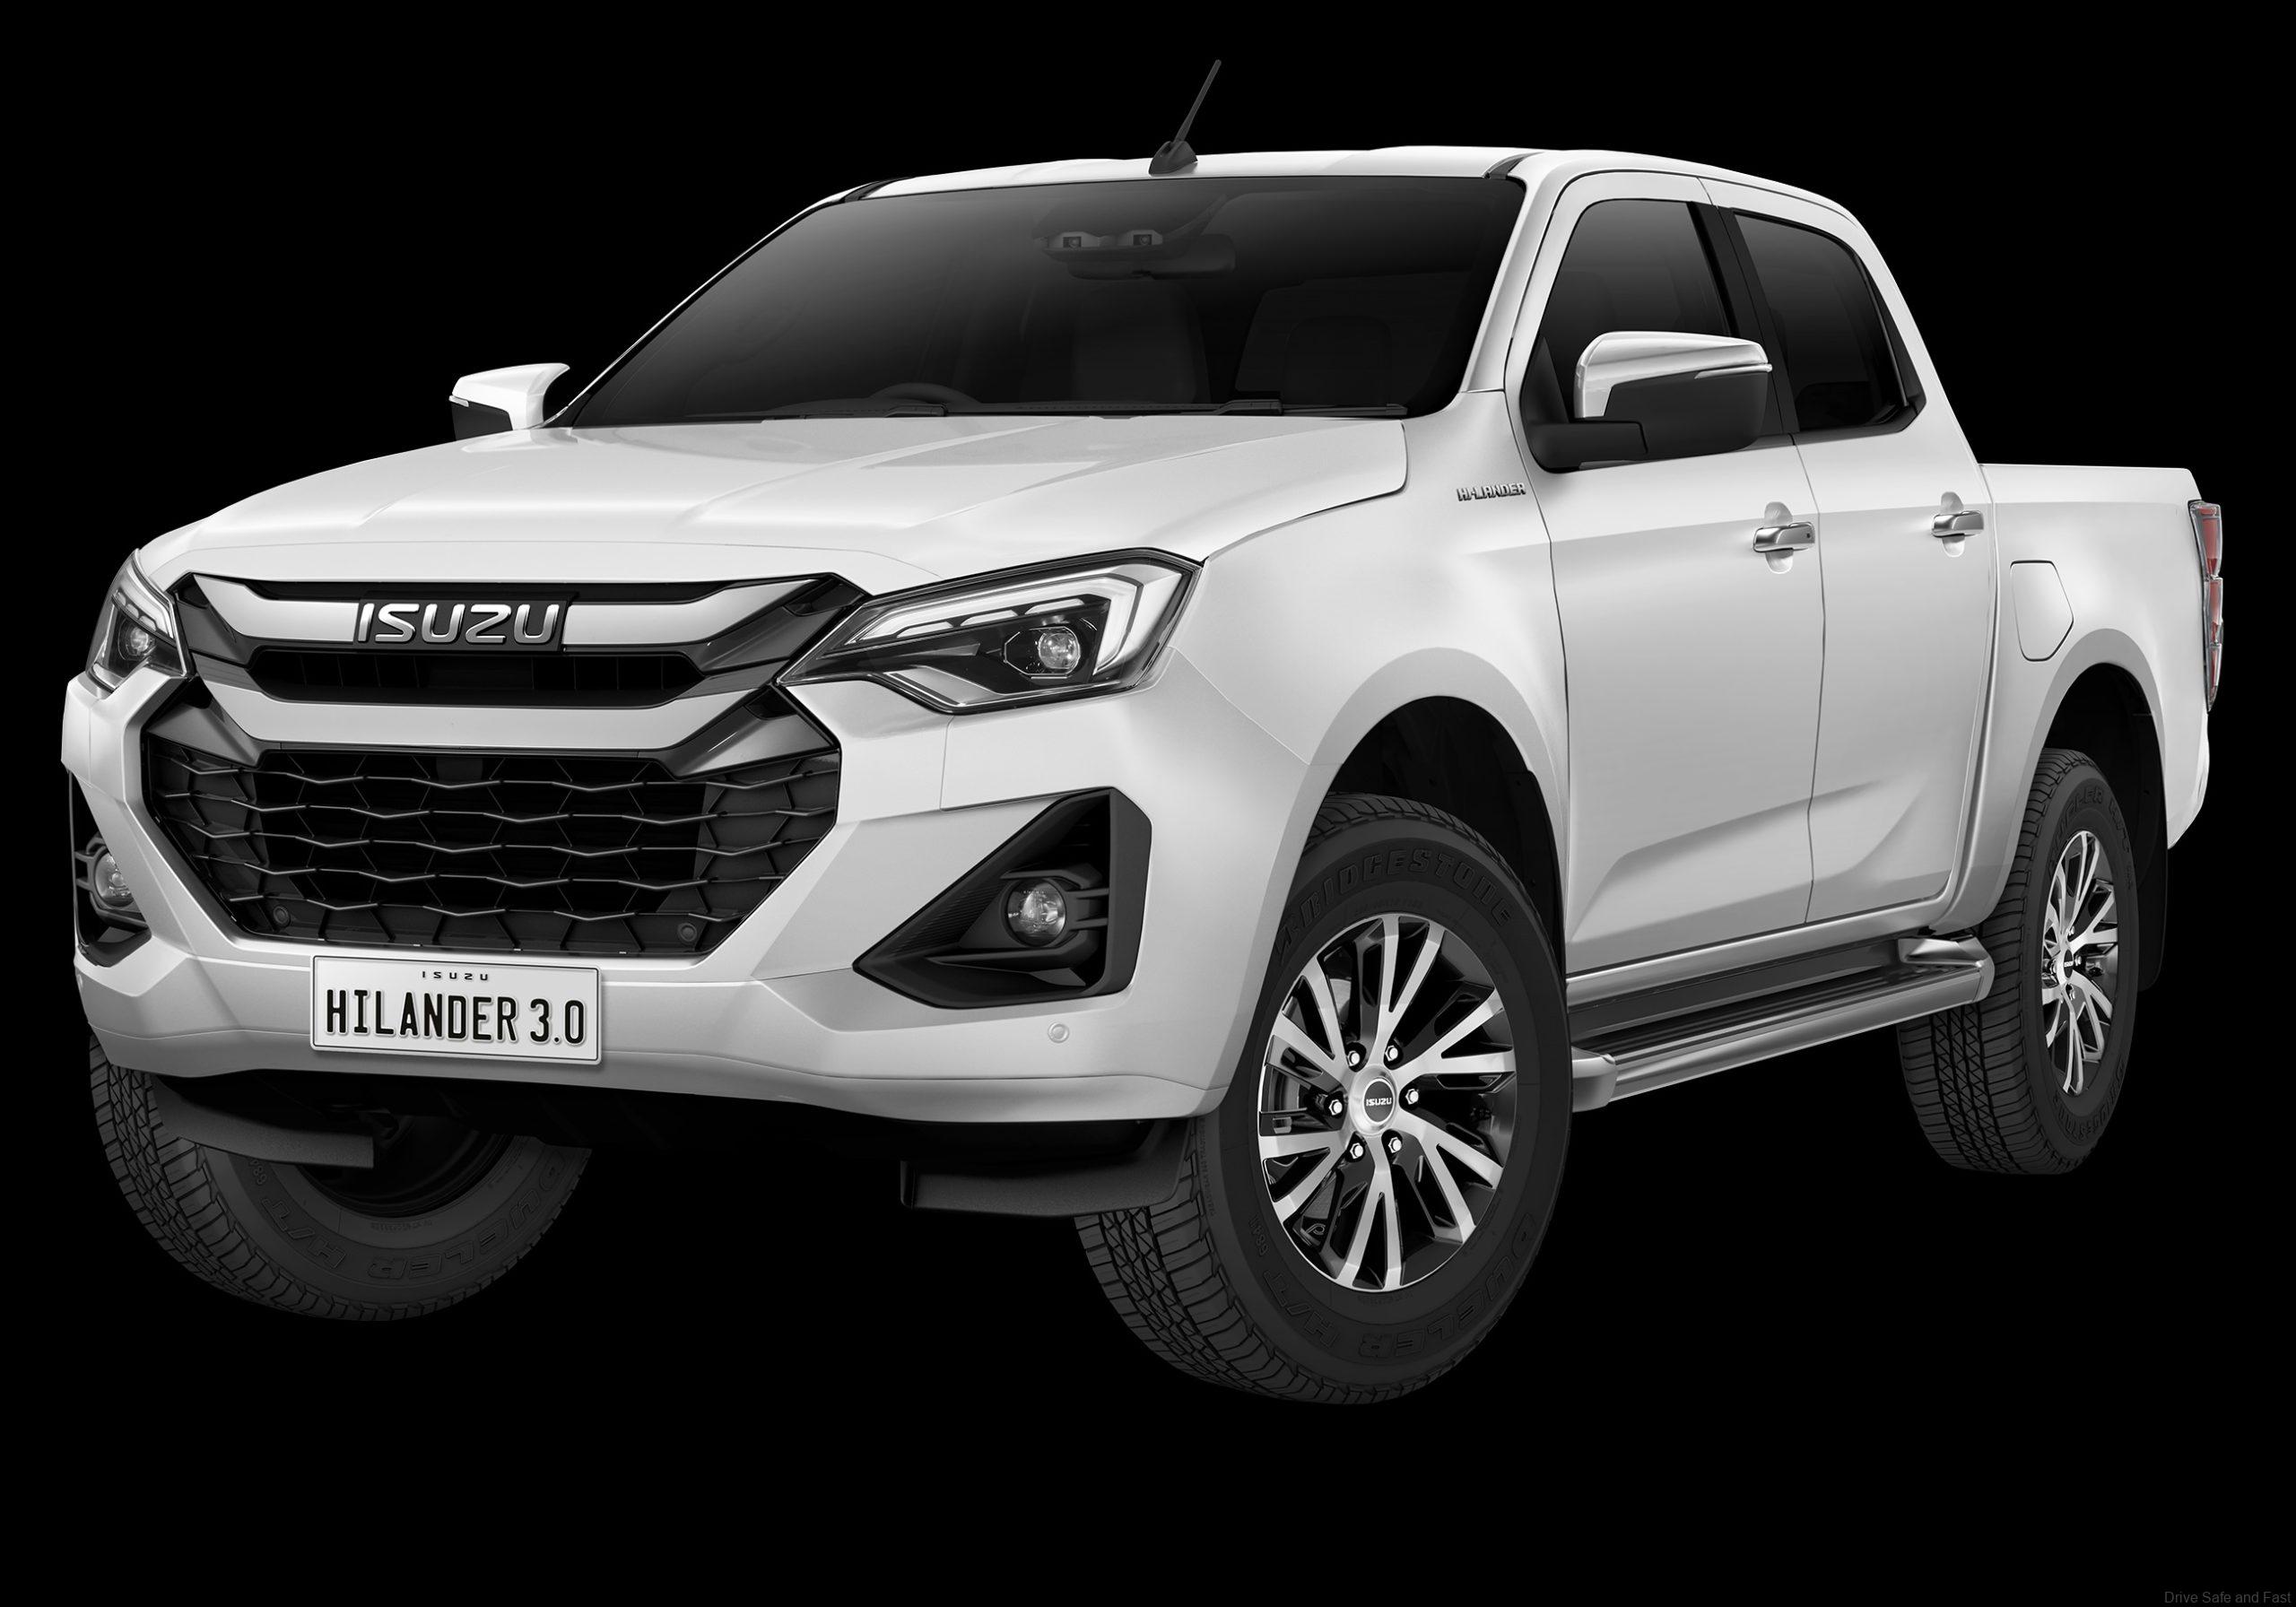 2024 Isuzu D-Max Revealed; Gets Revised Styling And Feature Updates